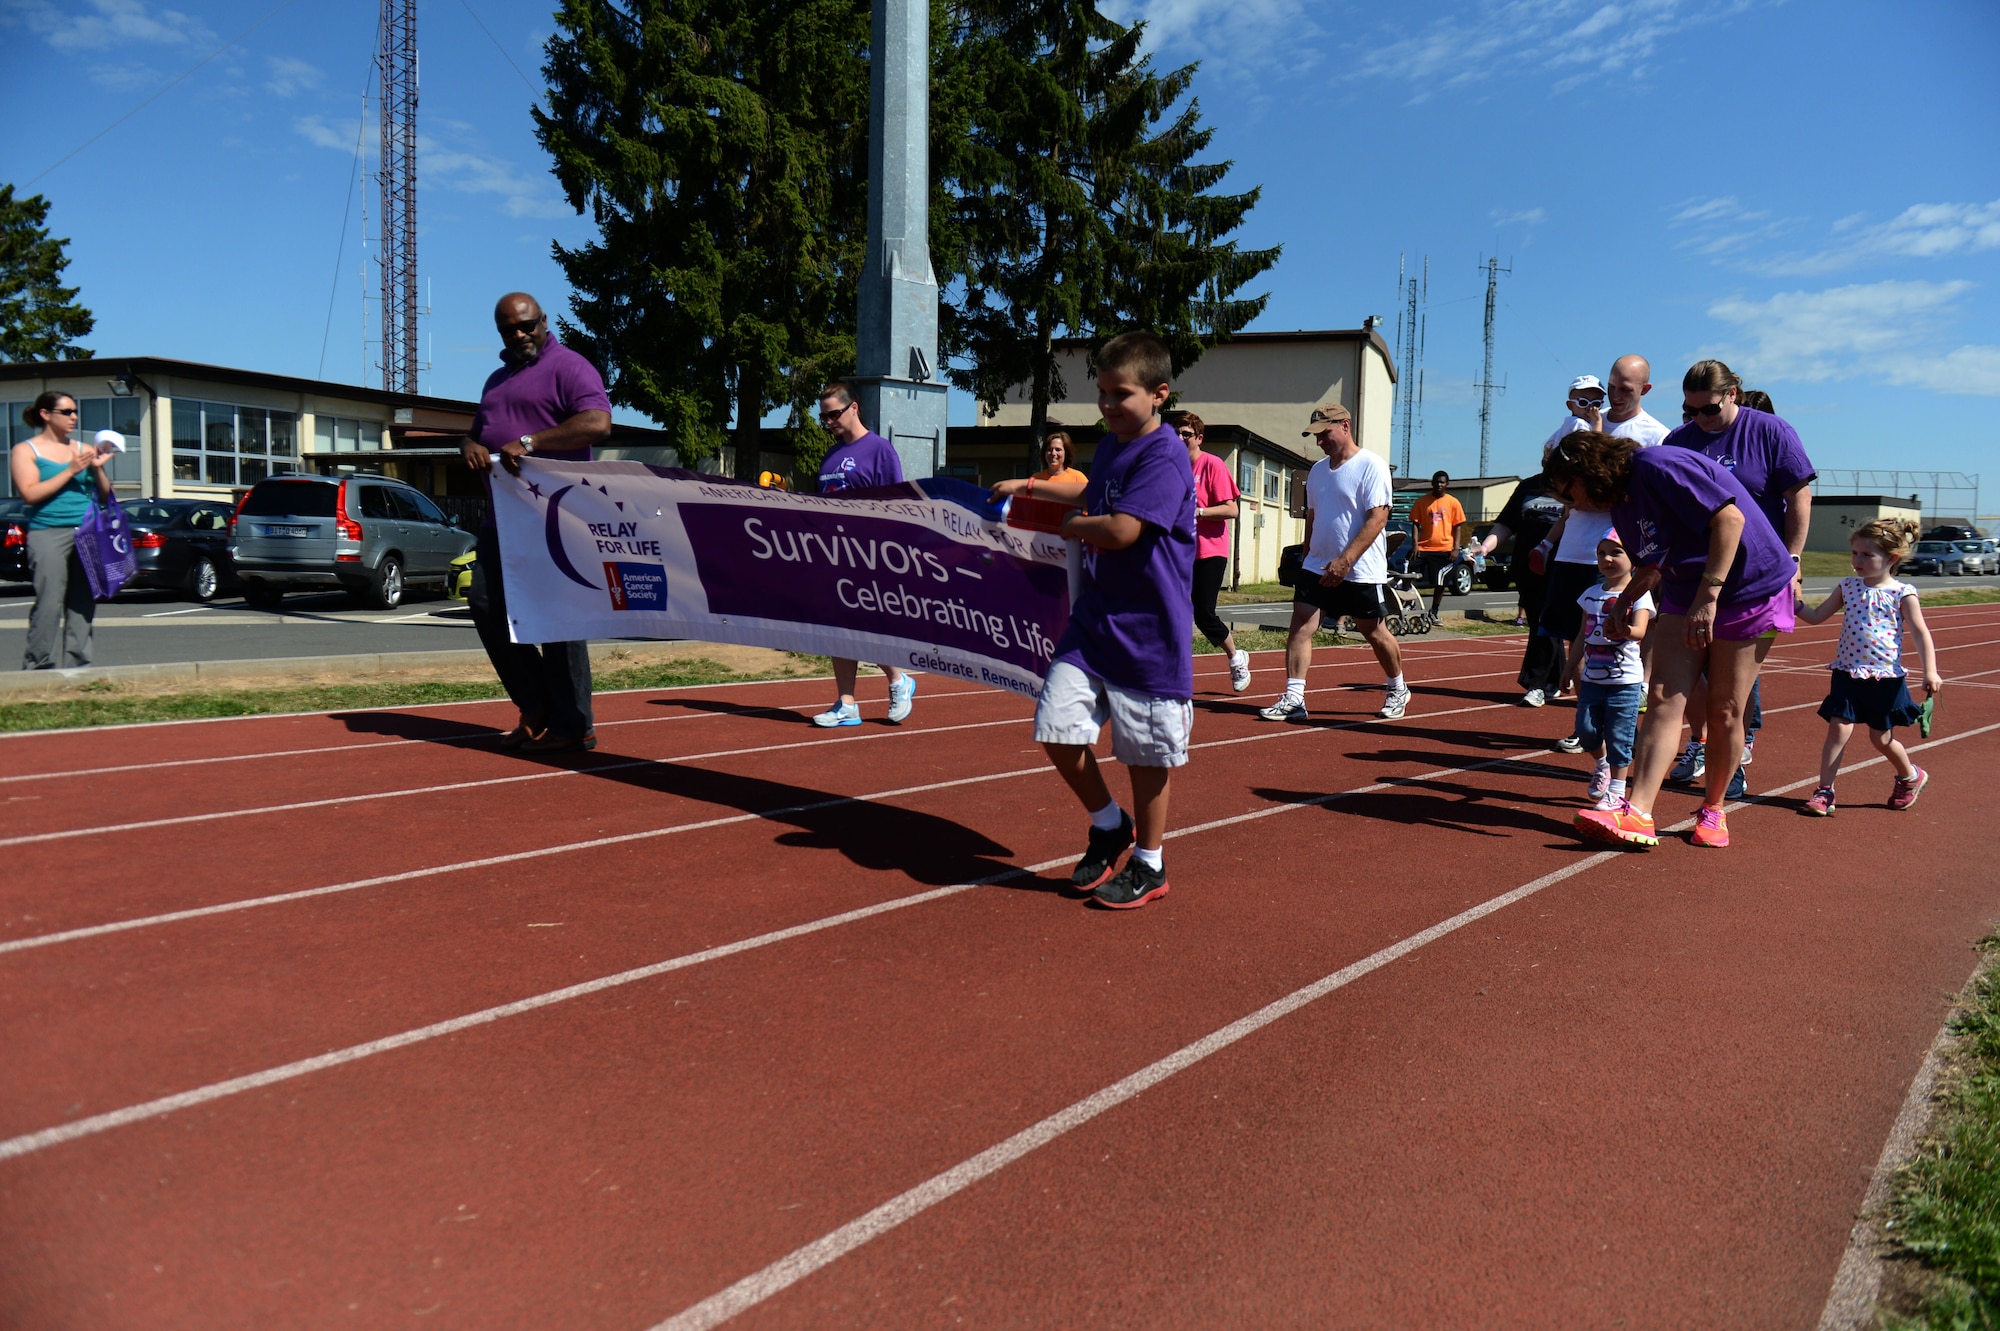 SPANGDAHLEM AIR BASE, Germany – Cancer survivors participate in the Survivor lap portion of a Relay for Life event at the track near the Skelton Memorial Fitness Center Aug. 16, 2013. The survivor lap symbolized the beginning of the event, which raised more than $24,700 toward cancer research. (U.S. Air Force photo by Airman 1st Class Gustavo Castillo/Released)